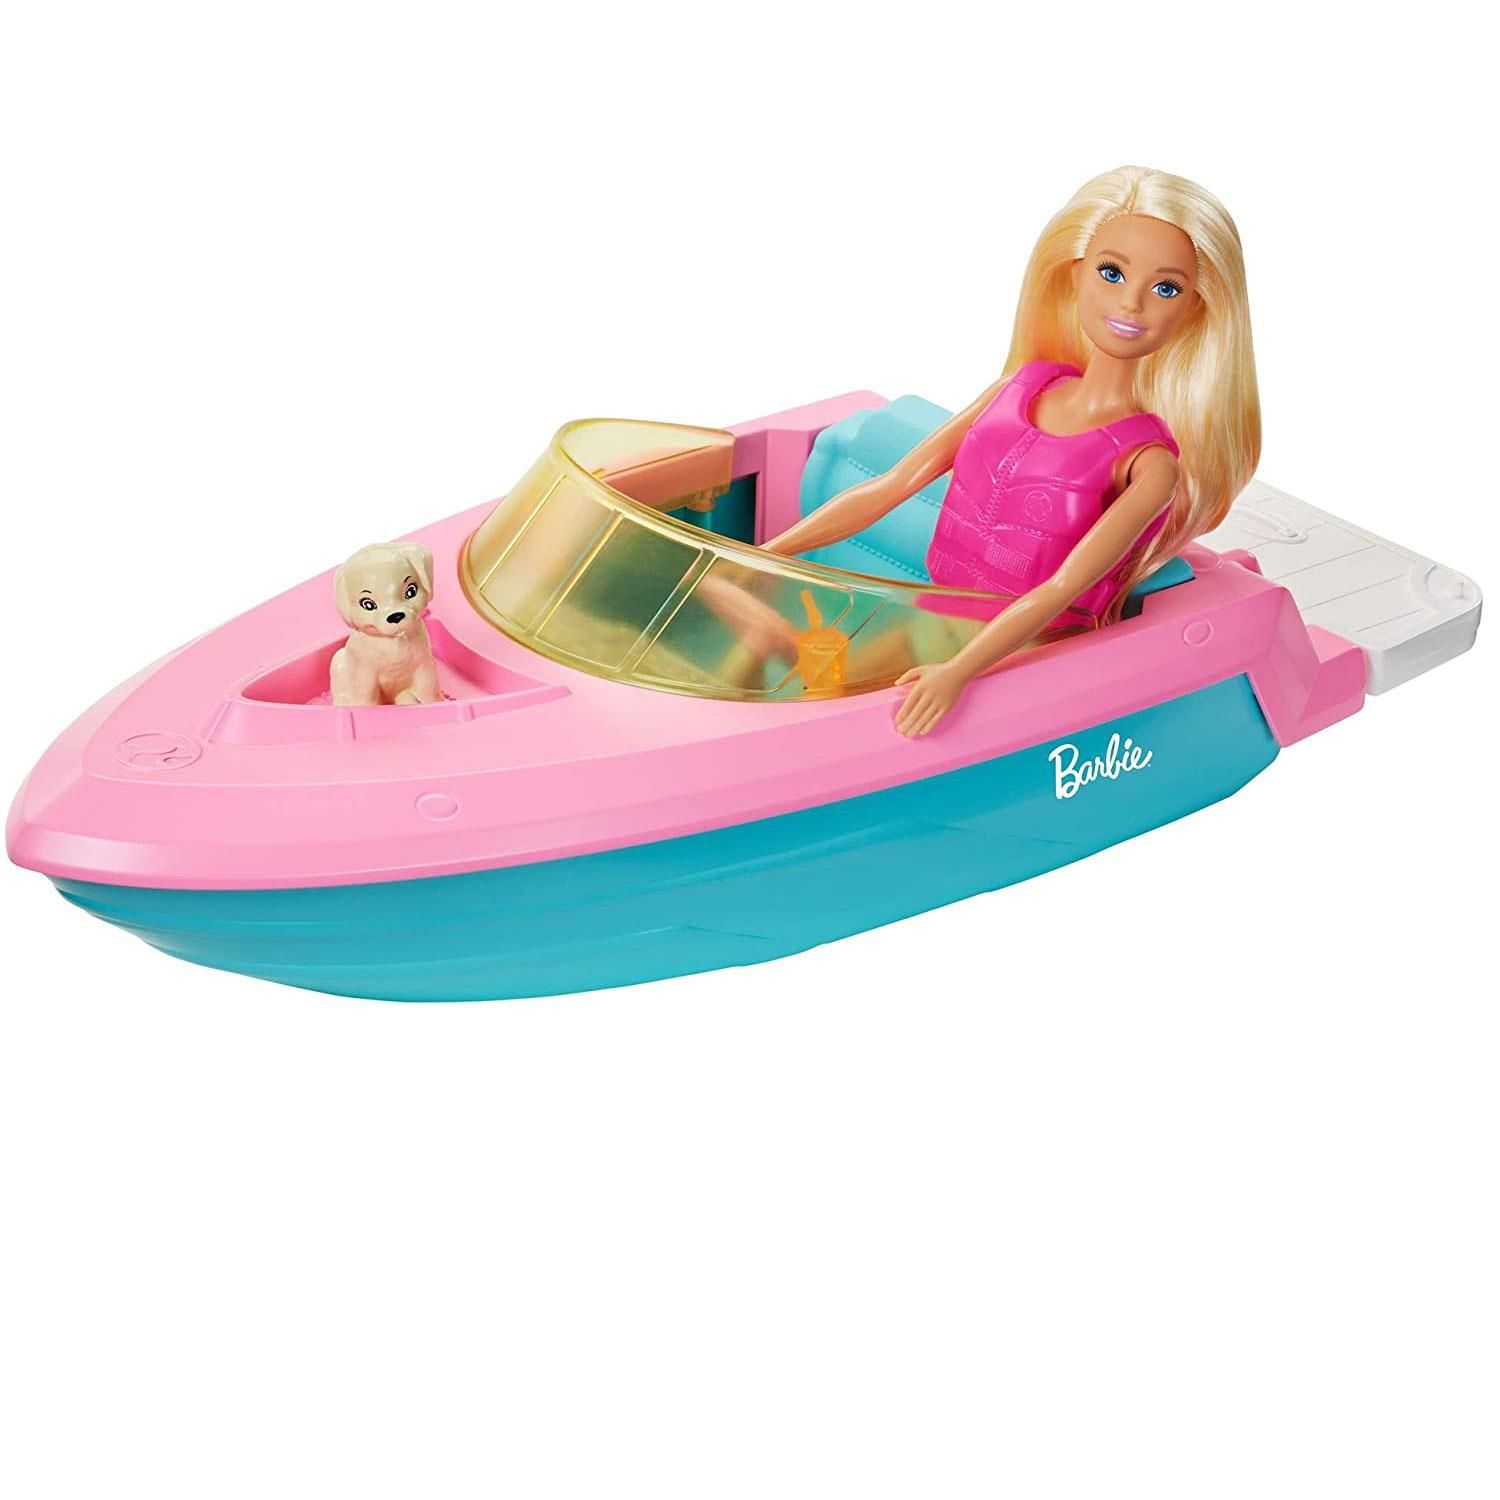 Barbie Boat with Puppy and Accessories, Great Toy Set For Children

Imaginations can take their stories from land to sea with a Barbie boat that really floats! With cool features, a colourful design and room for three dolls (sold separately), kids can load the speed boat up and take their Barbie dolls on all kinds of adventures. Slip a doll into the hot pink life vest and ride through the wake, then park the boat to lounge on the stern with plug-and-play cupholders and beverage accessories. Barbie doll's pet puppy is along for the ride, too -- there's even a special seat on the bow, just for him! A colourful pink and blue design is just a Barbie doll's style, and a translucent yellow weather shield adds another pop of colour. Whether young adventurers take this Barbie boat out on the water or imagine their own ocean of fun, the playtime possibilities are endless because you can be anything with Barbie! Kids can collect more Barbie dolls and accessories to pack the boat full of fun. Each is sold separately, subject to availability. Colours and decorations may vary.

Features:

Inspire travel adventures with a Barbie boat that really floats!
With cool features, a colourful design and room for 3 dolls (sold separately), this pink and blue speedboat spark endless sea-inspired stories.
Barbie doll's pet puppy is along for the ride -- there's even a special seat on the bow, just for him!
Park the boat to lounge on the stern with plug-and-play cupholders and beverage accessories!
Whether young adventurers take this Barbie boat out on the water or imagine their own ocean of fun, the playtime possibilities are endless because you can be anything with Barbie!

Specifications: 

Toy Form: Barbie Boat 
Age Range: 3 Years & Above
Material: Abs Plastic
Colour: Blue & Black

Package Includes: Barbie Boat with Puppy and Accessories